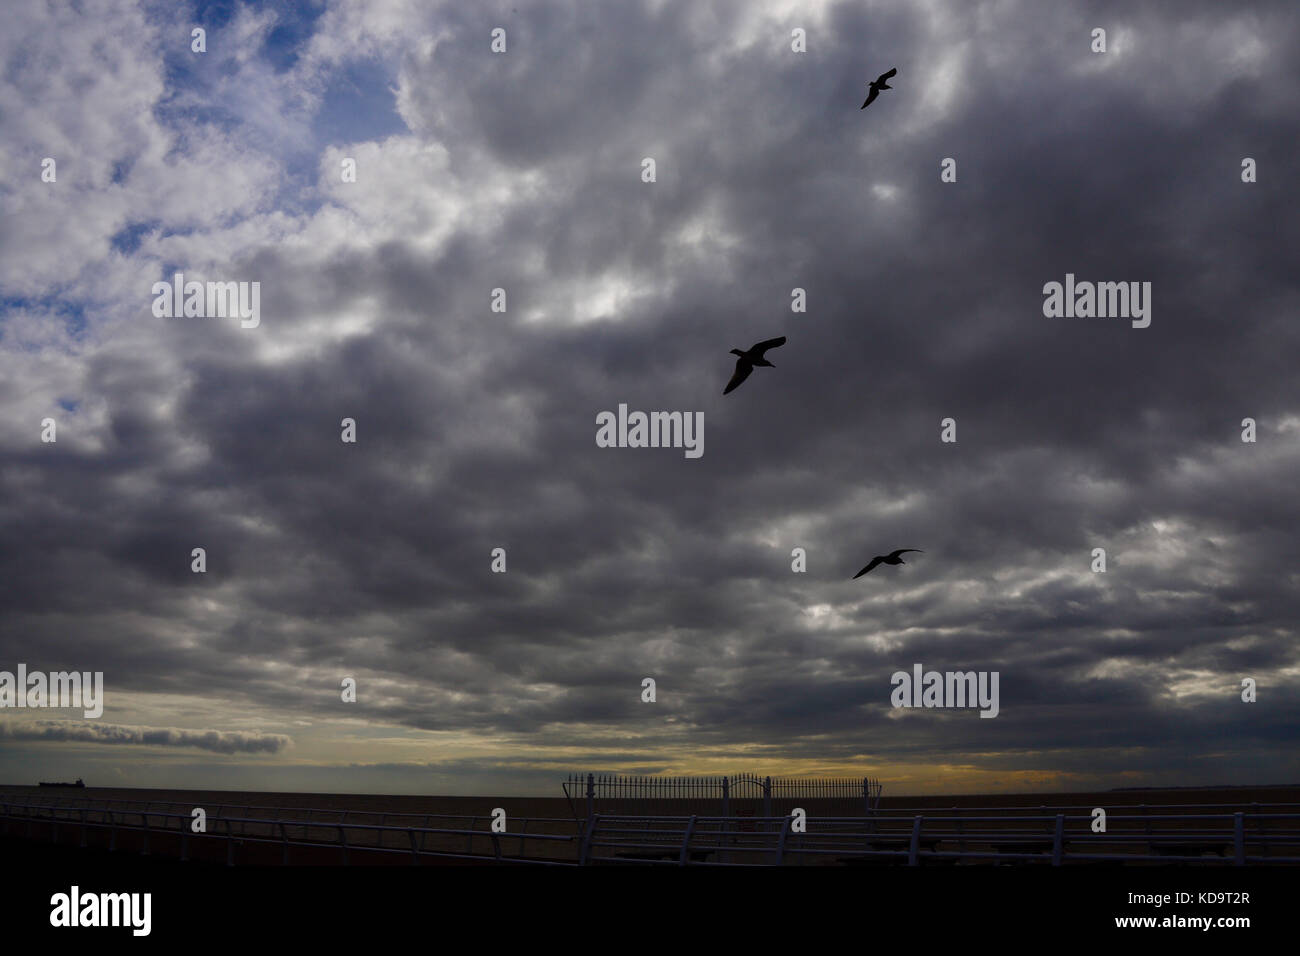 Felixstowe, Suffolk, UK. 11th Oct, 2017. UK Weather: Cloudy skies and seabirds over the pier on a breezy October aftenoon. Felixstowe, Suffolk. Credit: Angela Chalmers/Alamy Live News Stock Photo